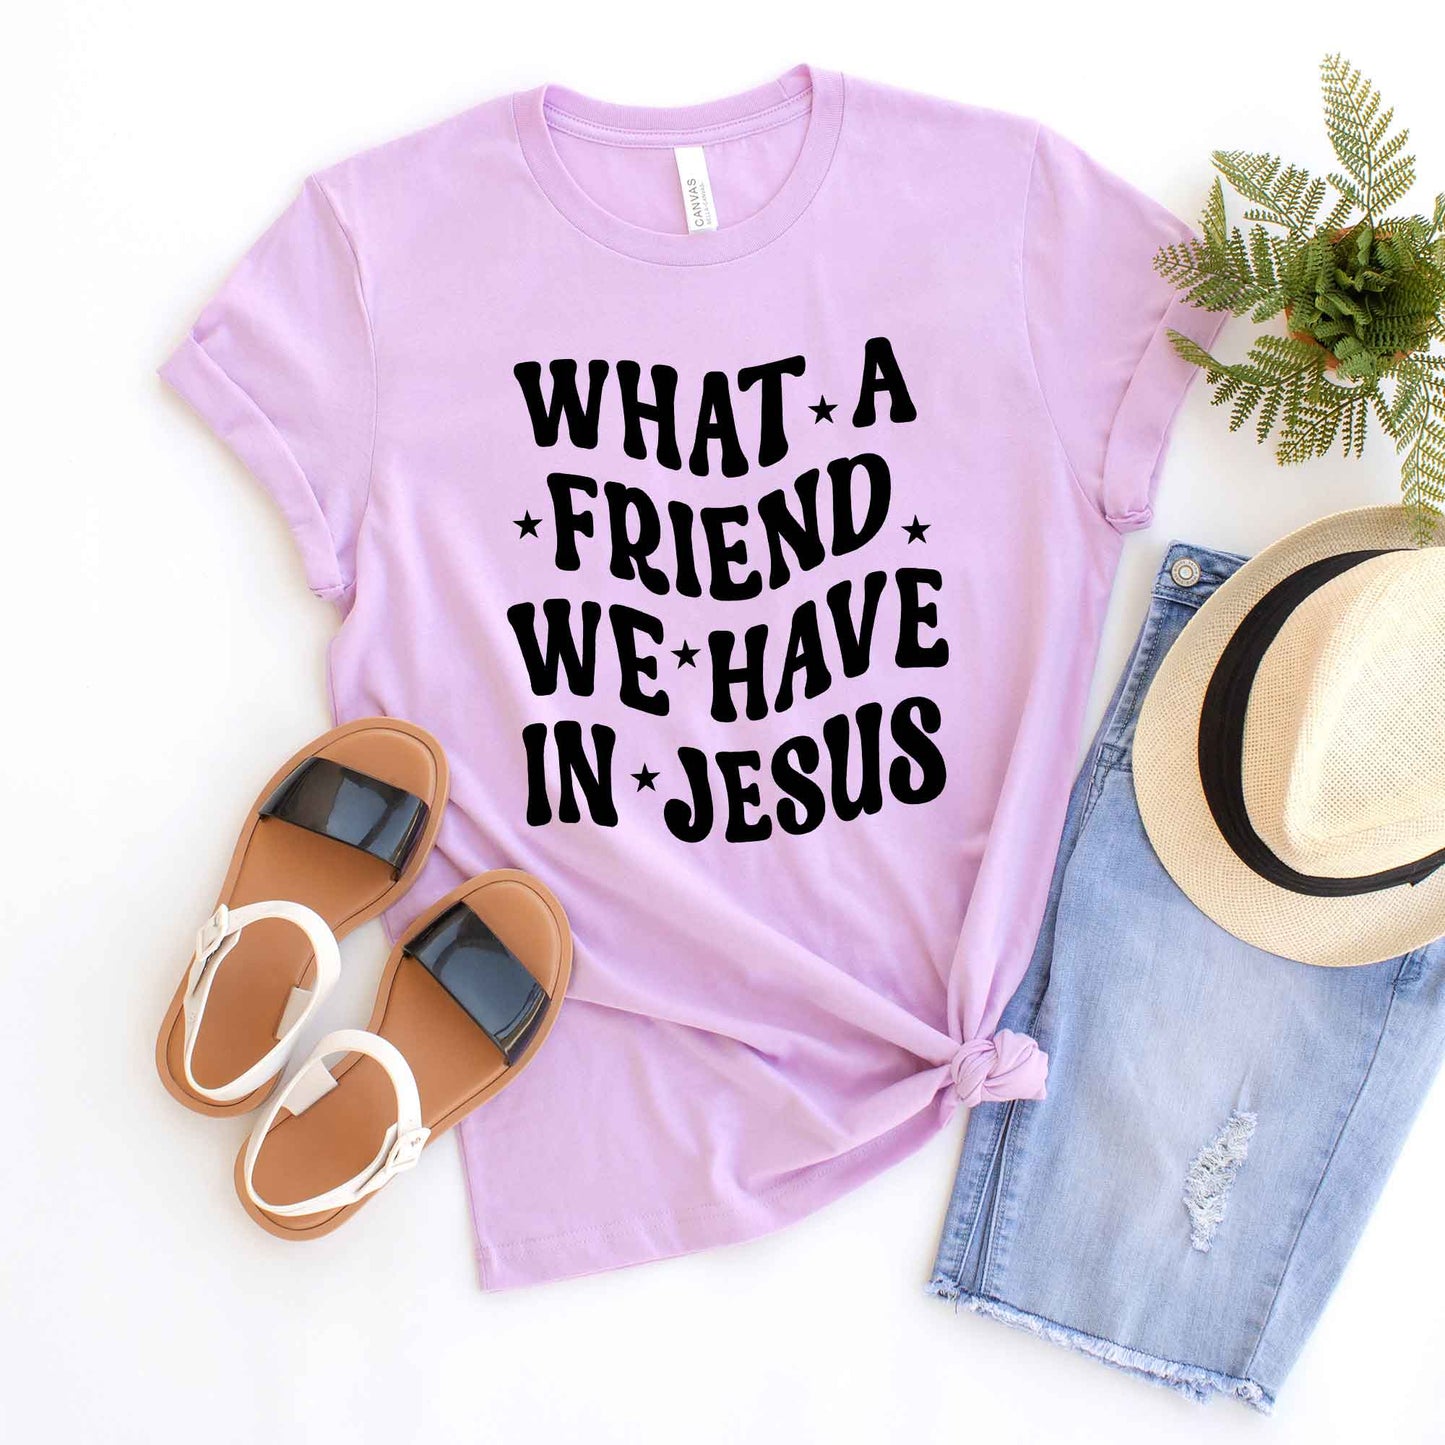 What A Friend We Have In Jesus | Short Sleeve Crew Neck